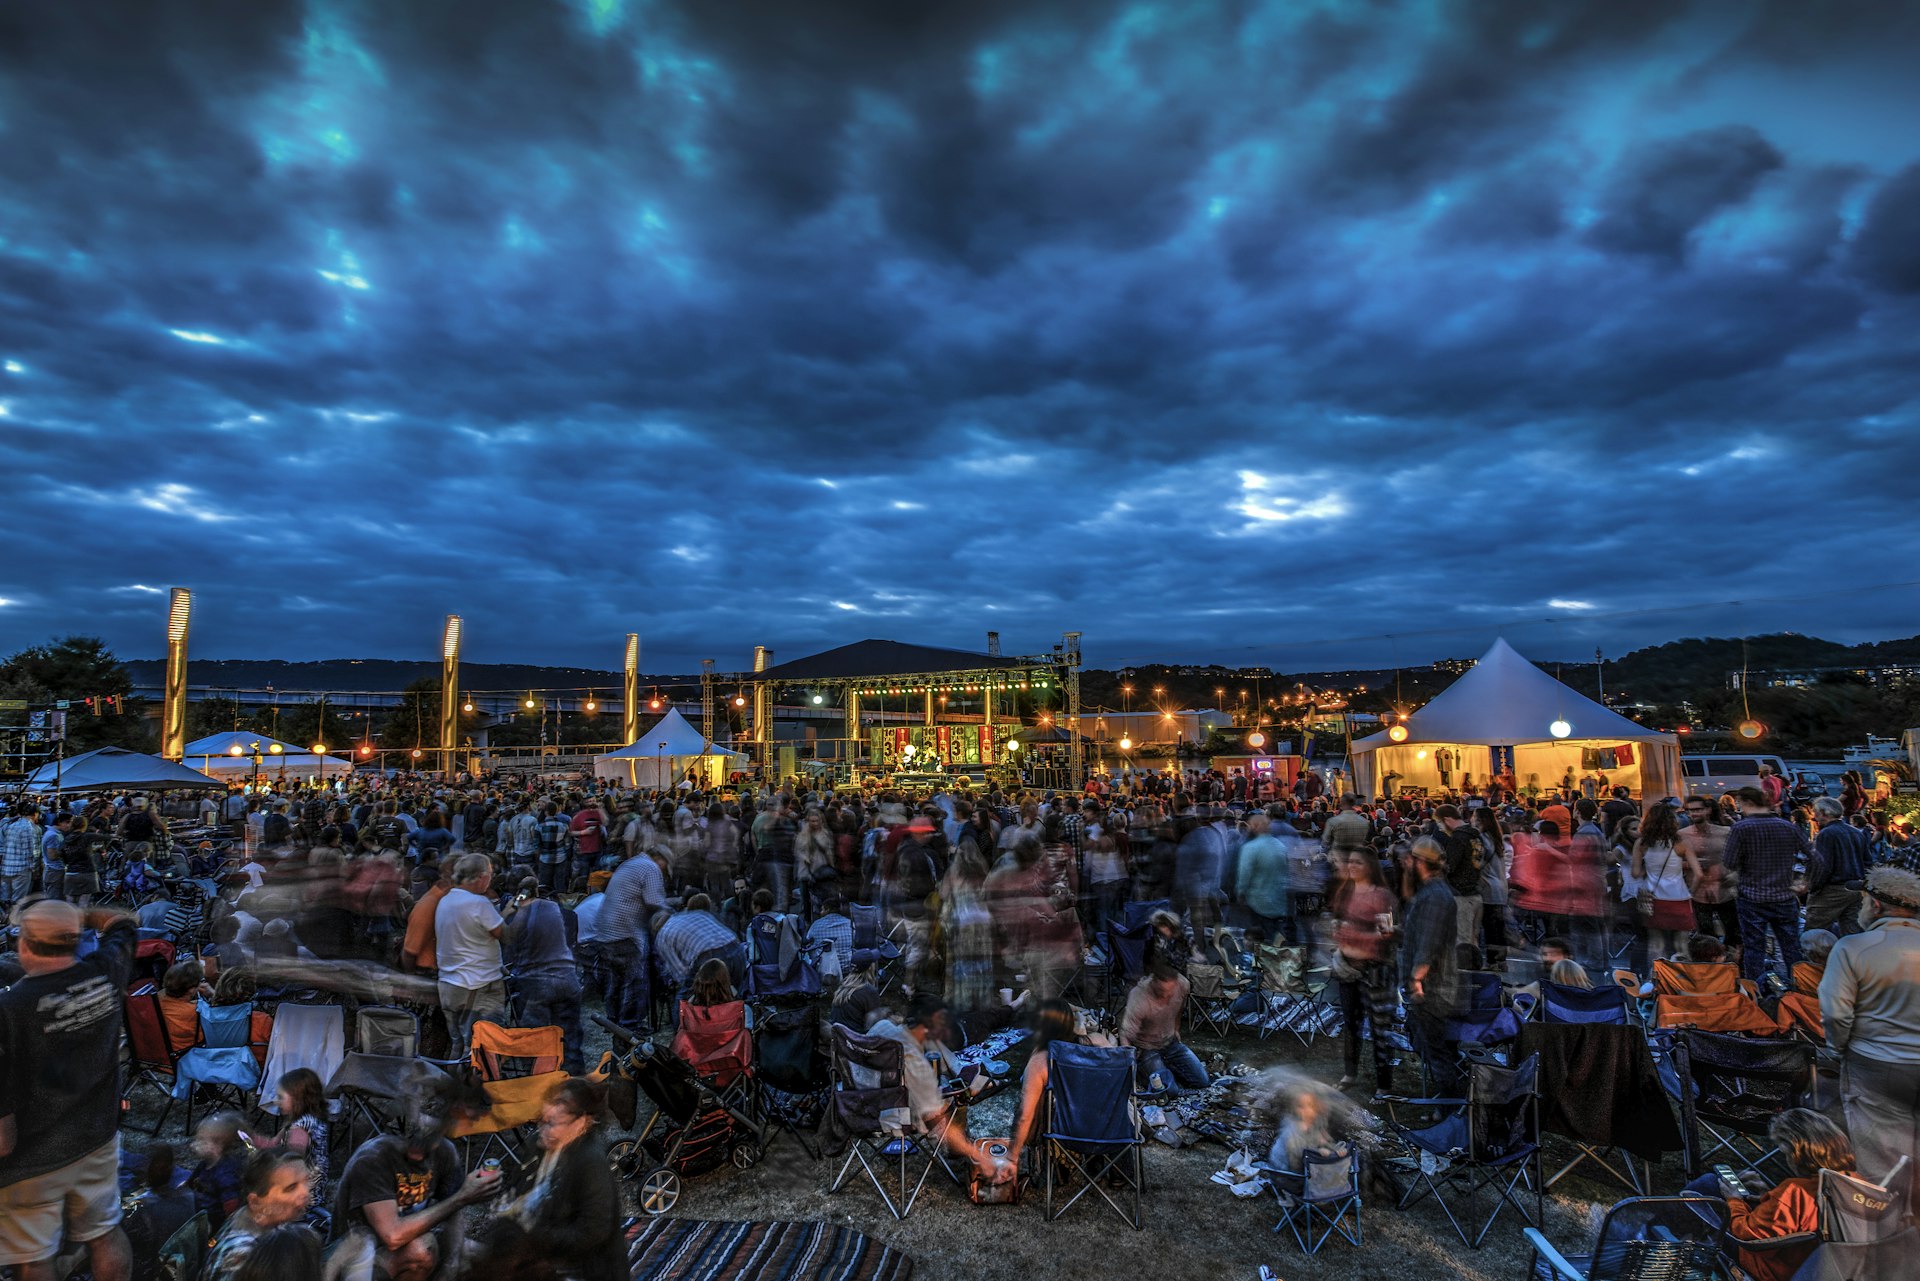 Concert crowd sat on the ground at an outdoor music festival with large dark clouds in the sky above the stage